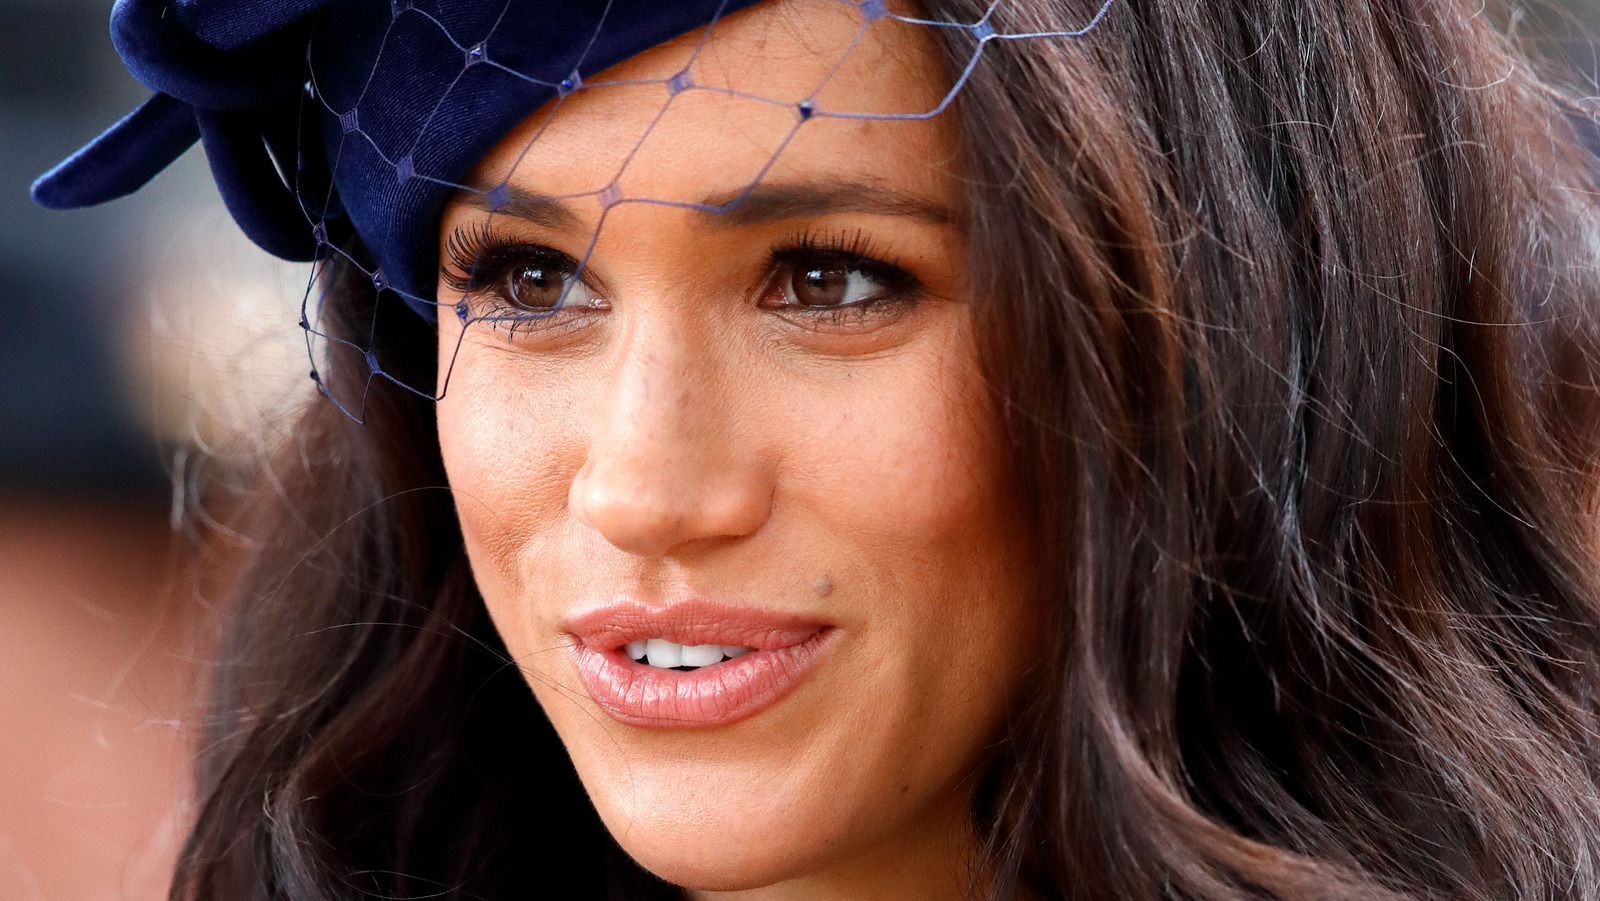 Meghan Markle's Rep Releases A Strong Statement Amid New Bullying Accusations